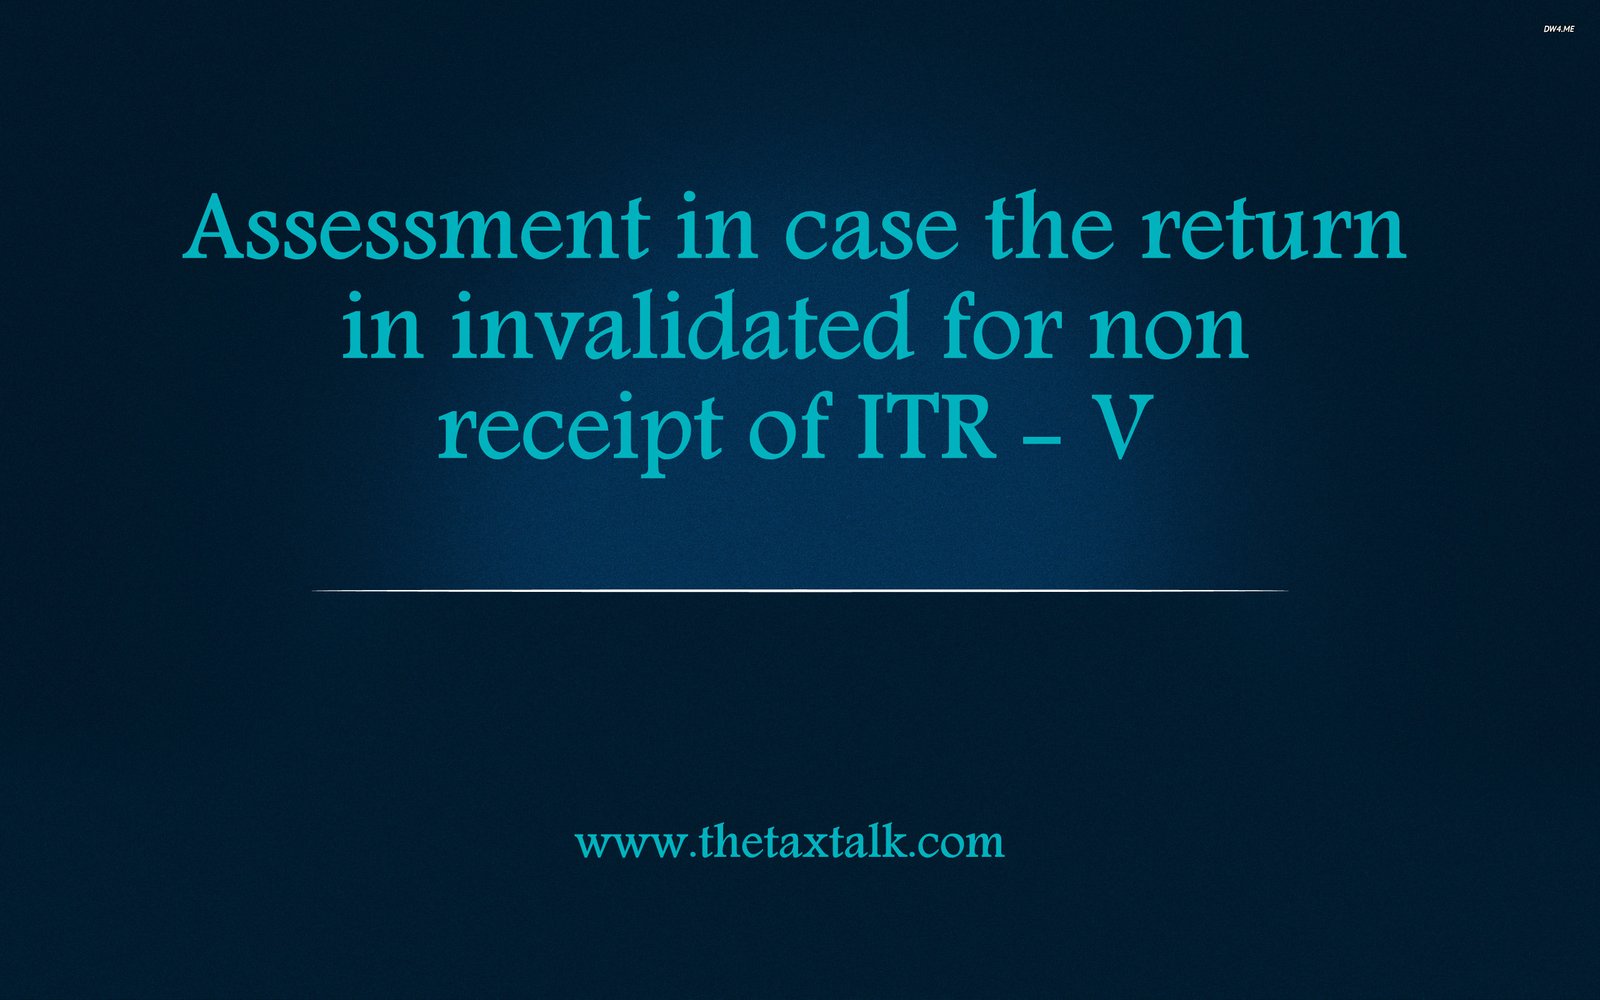 Assessment in case the return in invalidated for non receipt of ITR - V